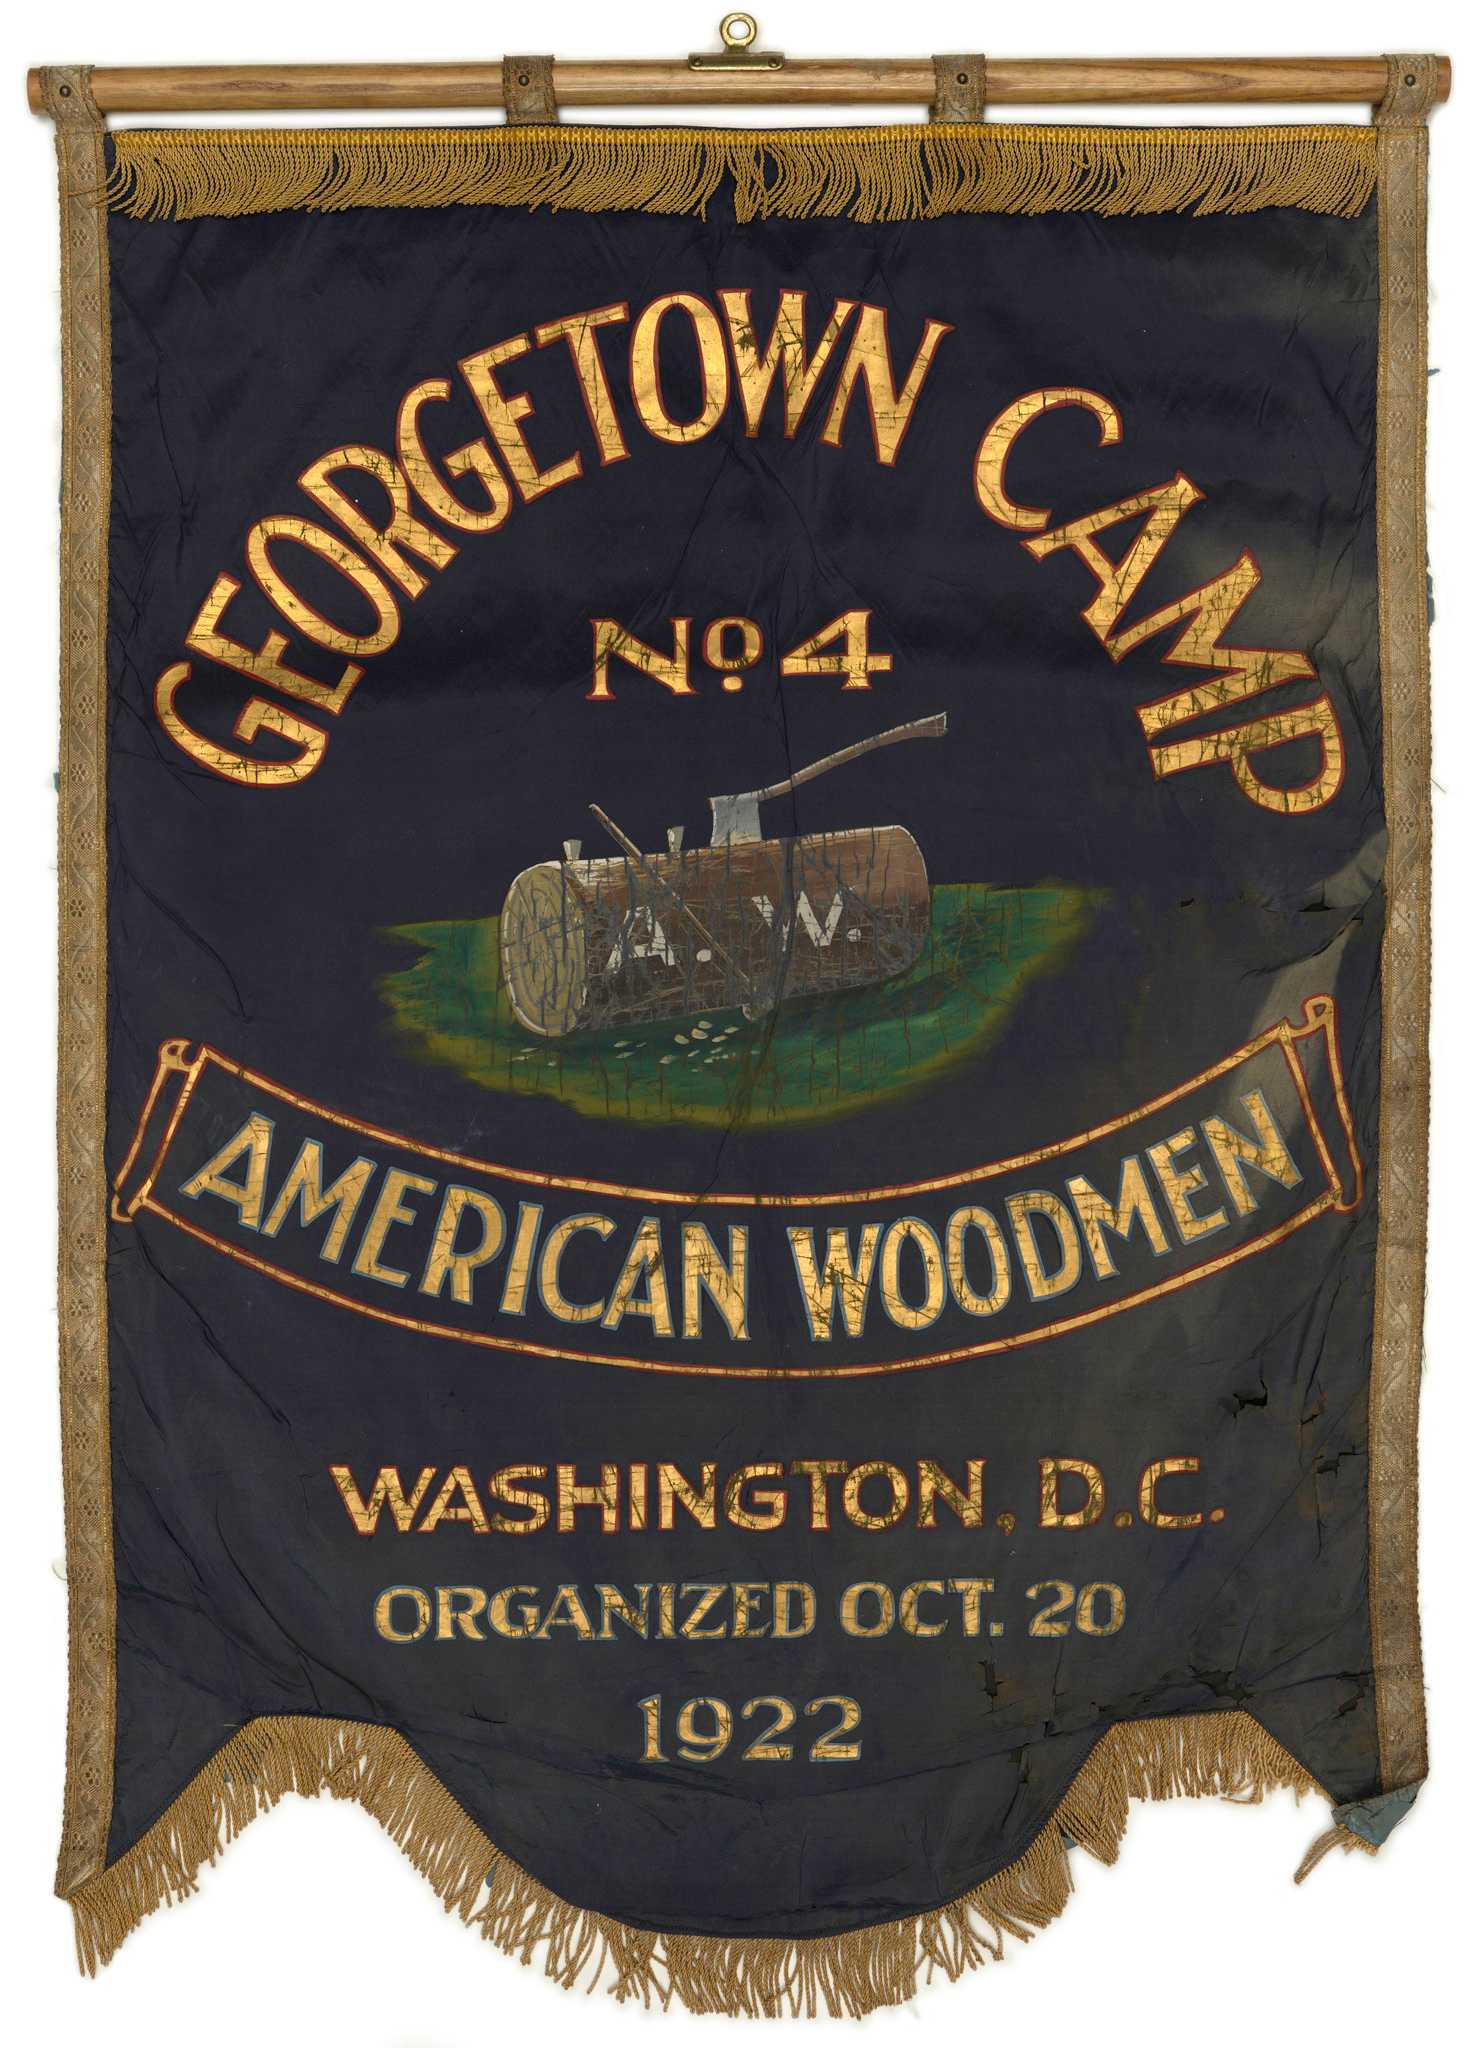 The banner dark purple with gold colored lettering with an image of an ax stuck in a log on green grass is at the center.